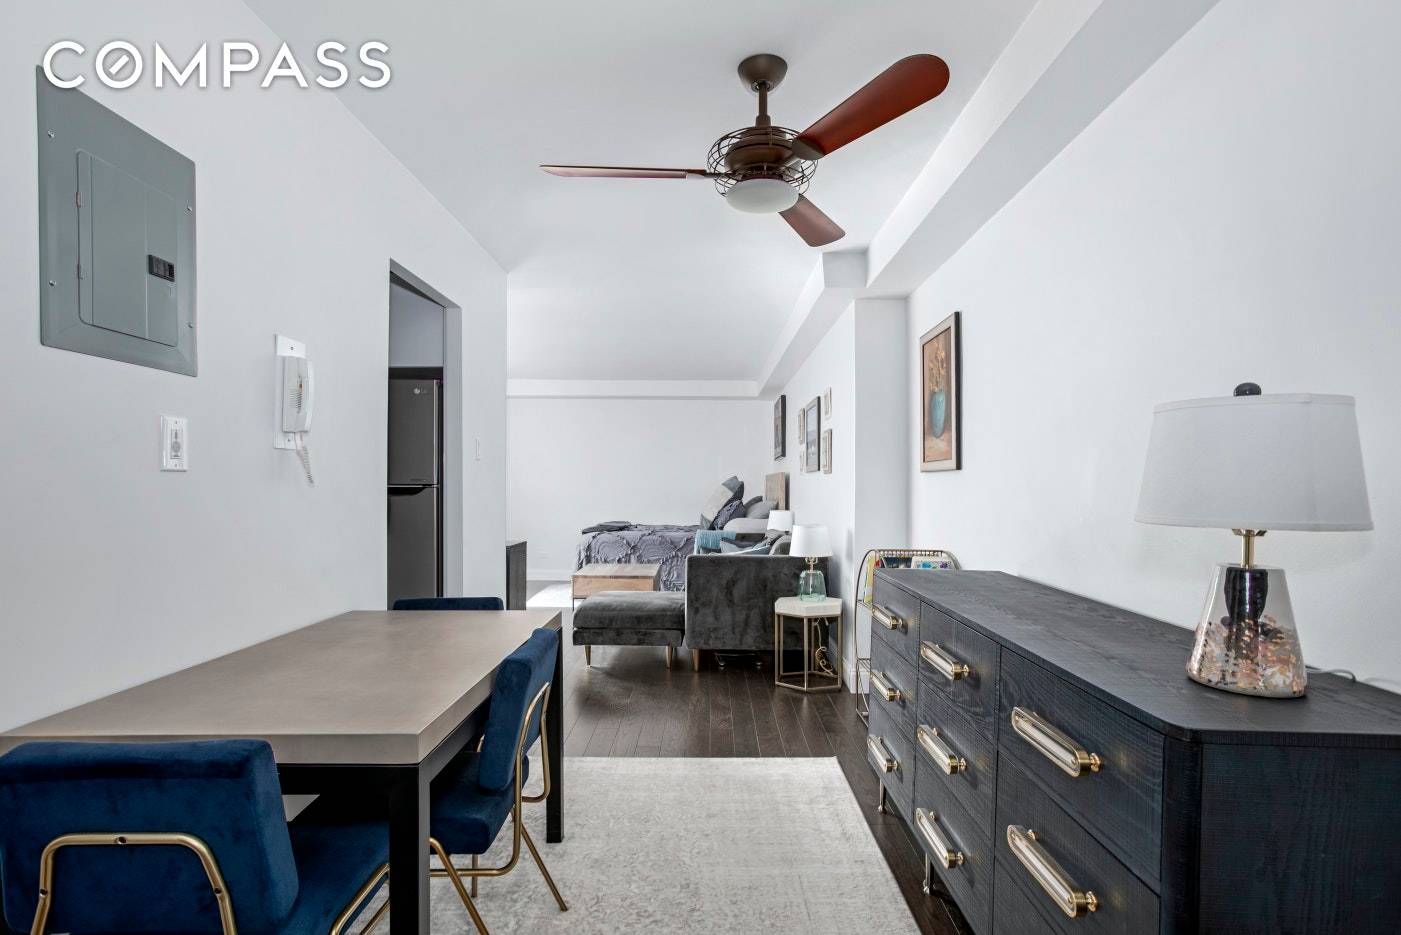 Beautifully gut renovated from top to bottom, this extra large studio checks every box with fantastic living space, storage and updates in a full service Kips Bay co op.